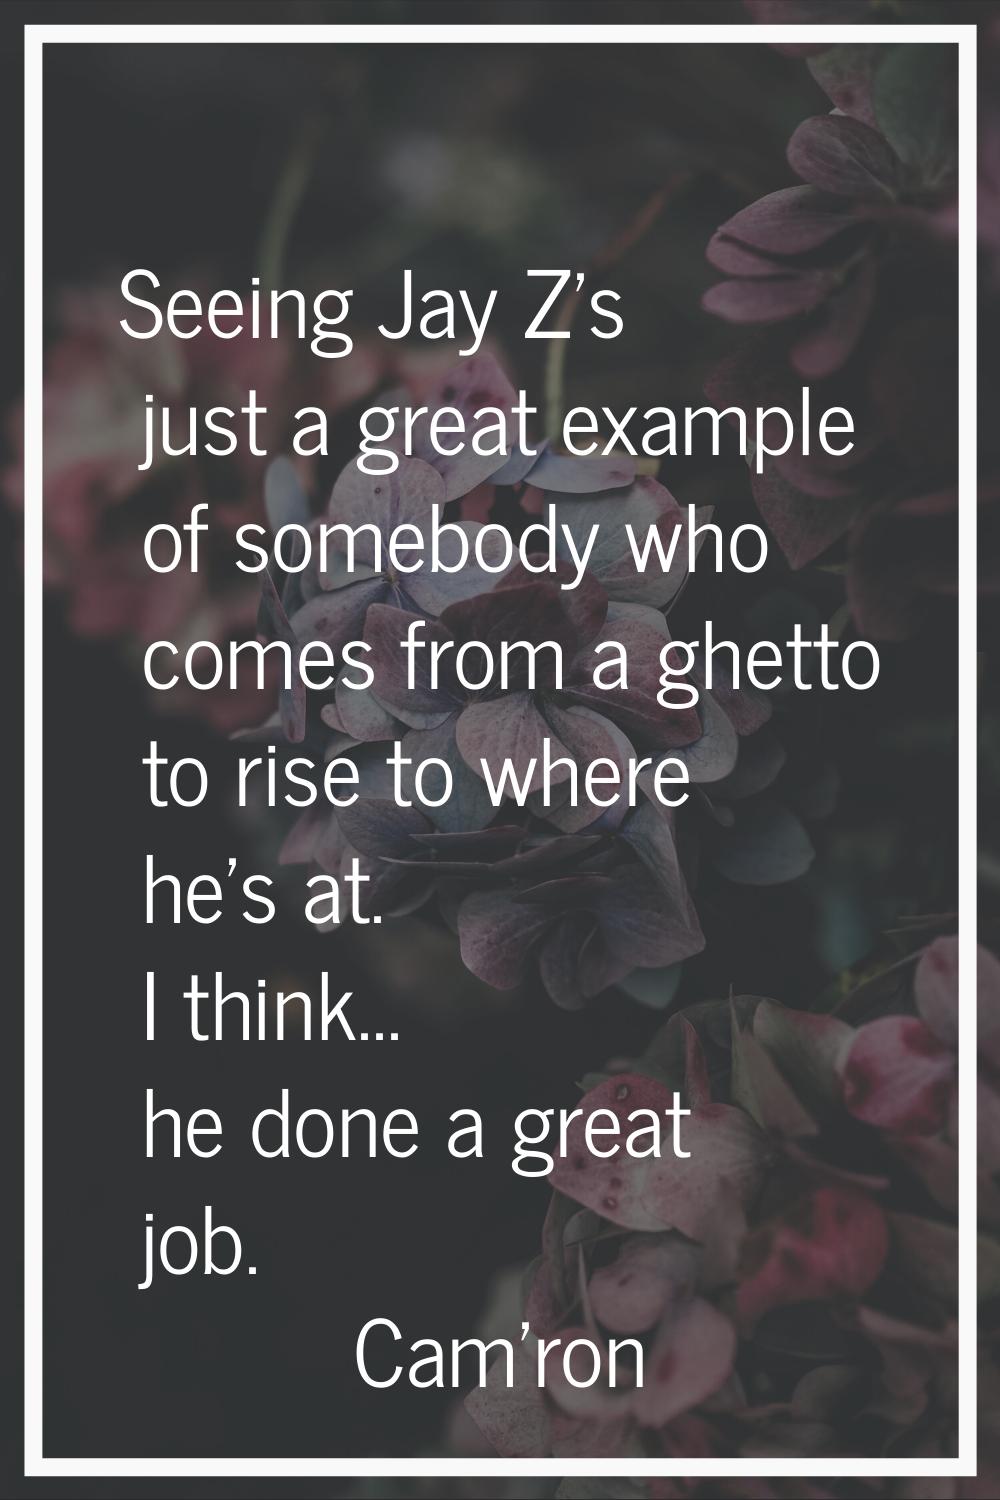 Seeing Jay Z's just a great example of somebody who comes from a ghetto to rise to where he's at. I